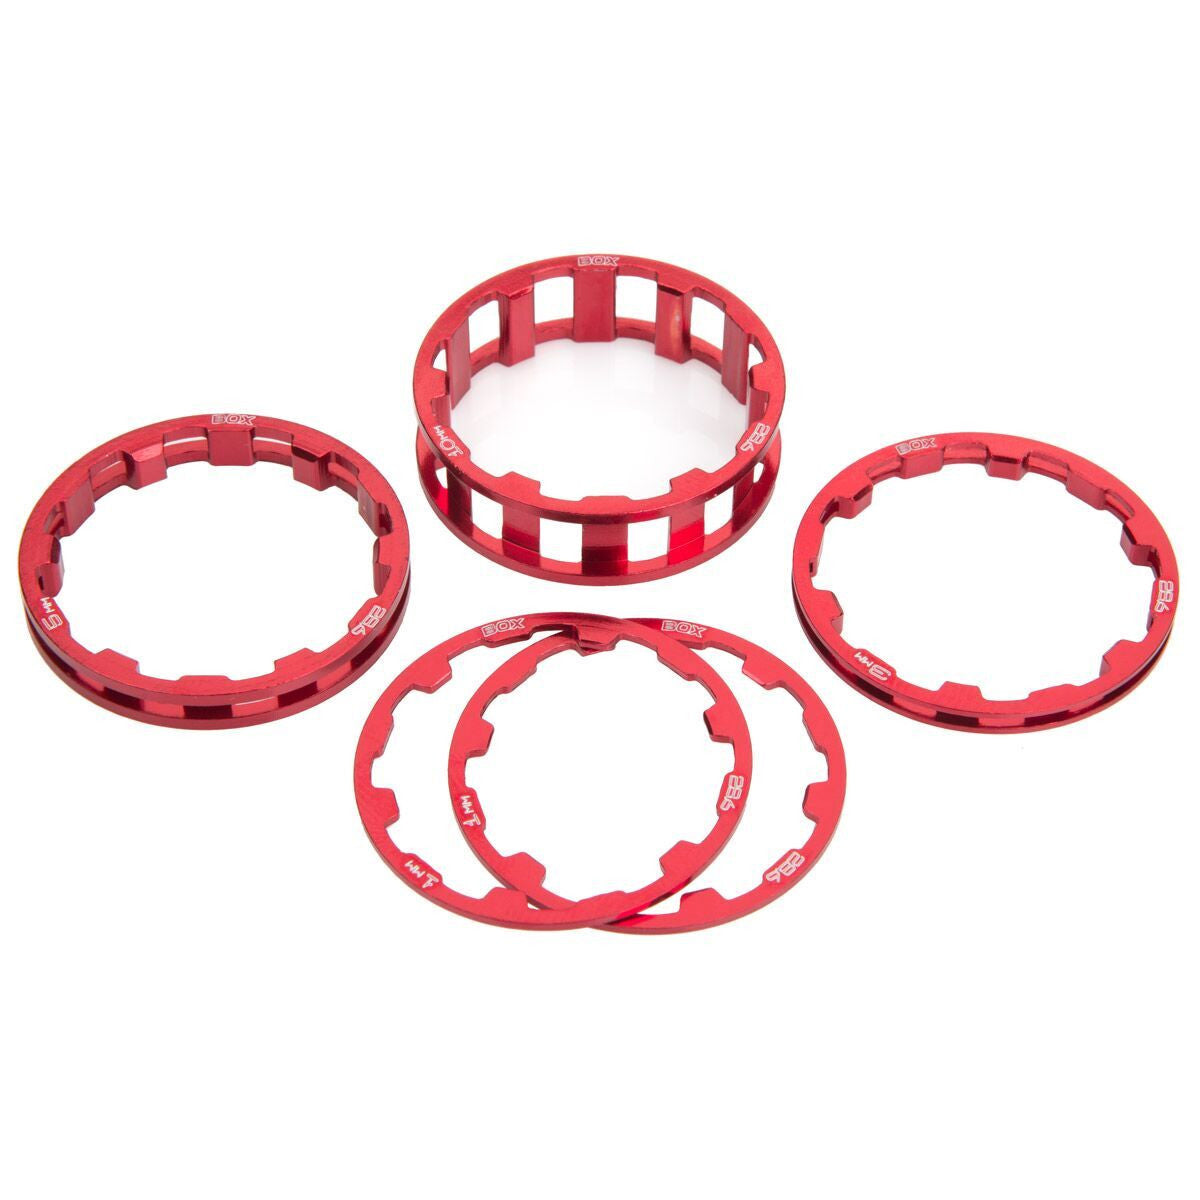 Box One Headset Spacers Kit